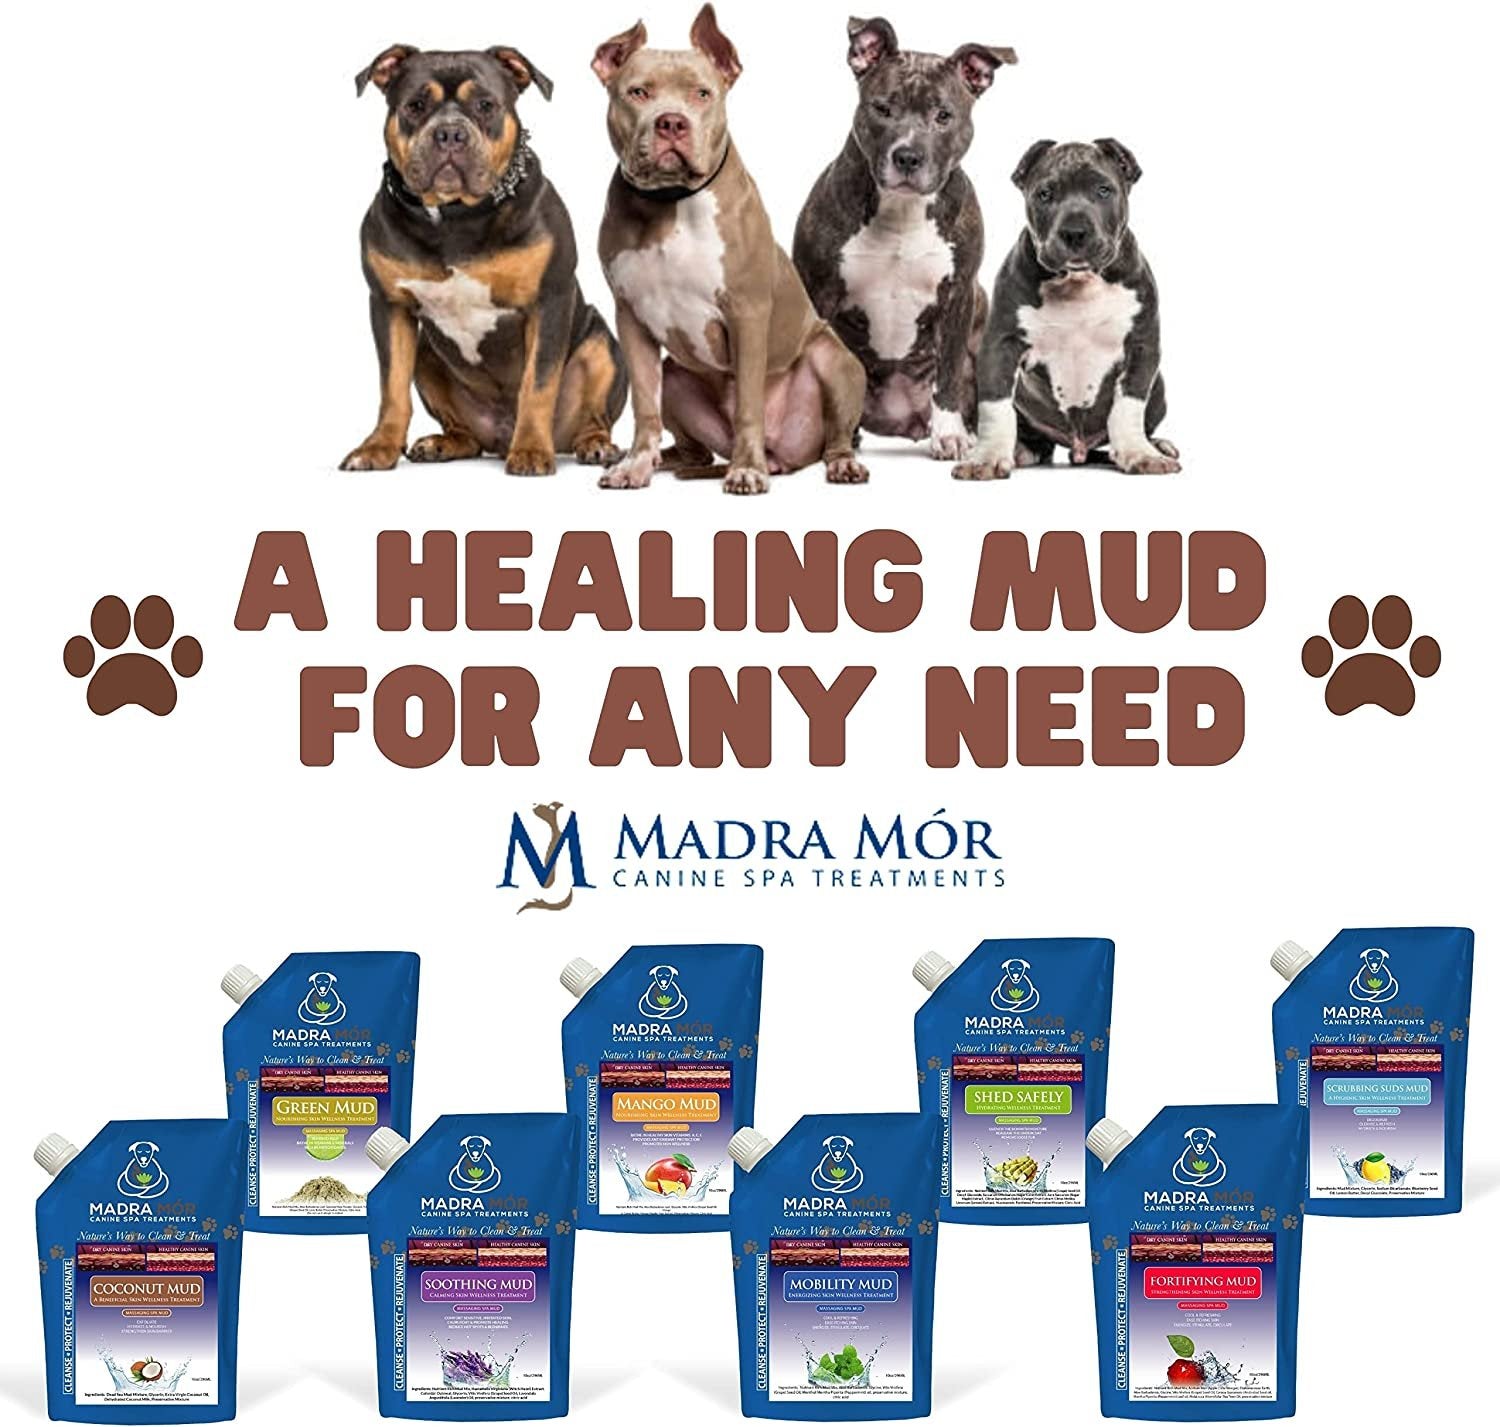 Madra Mor Massaging SPA Mud - Luxurious Dog Skin Wellness Treatment - Cleanse - Protect - Rejuvenate - Coconut Mud - 1 Pack (10oz) - with Multi-Purpose Key Chain